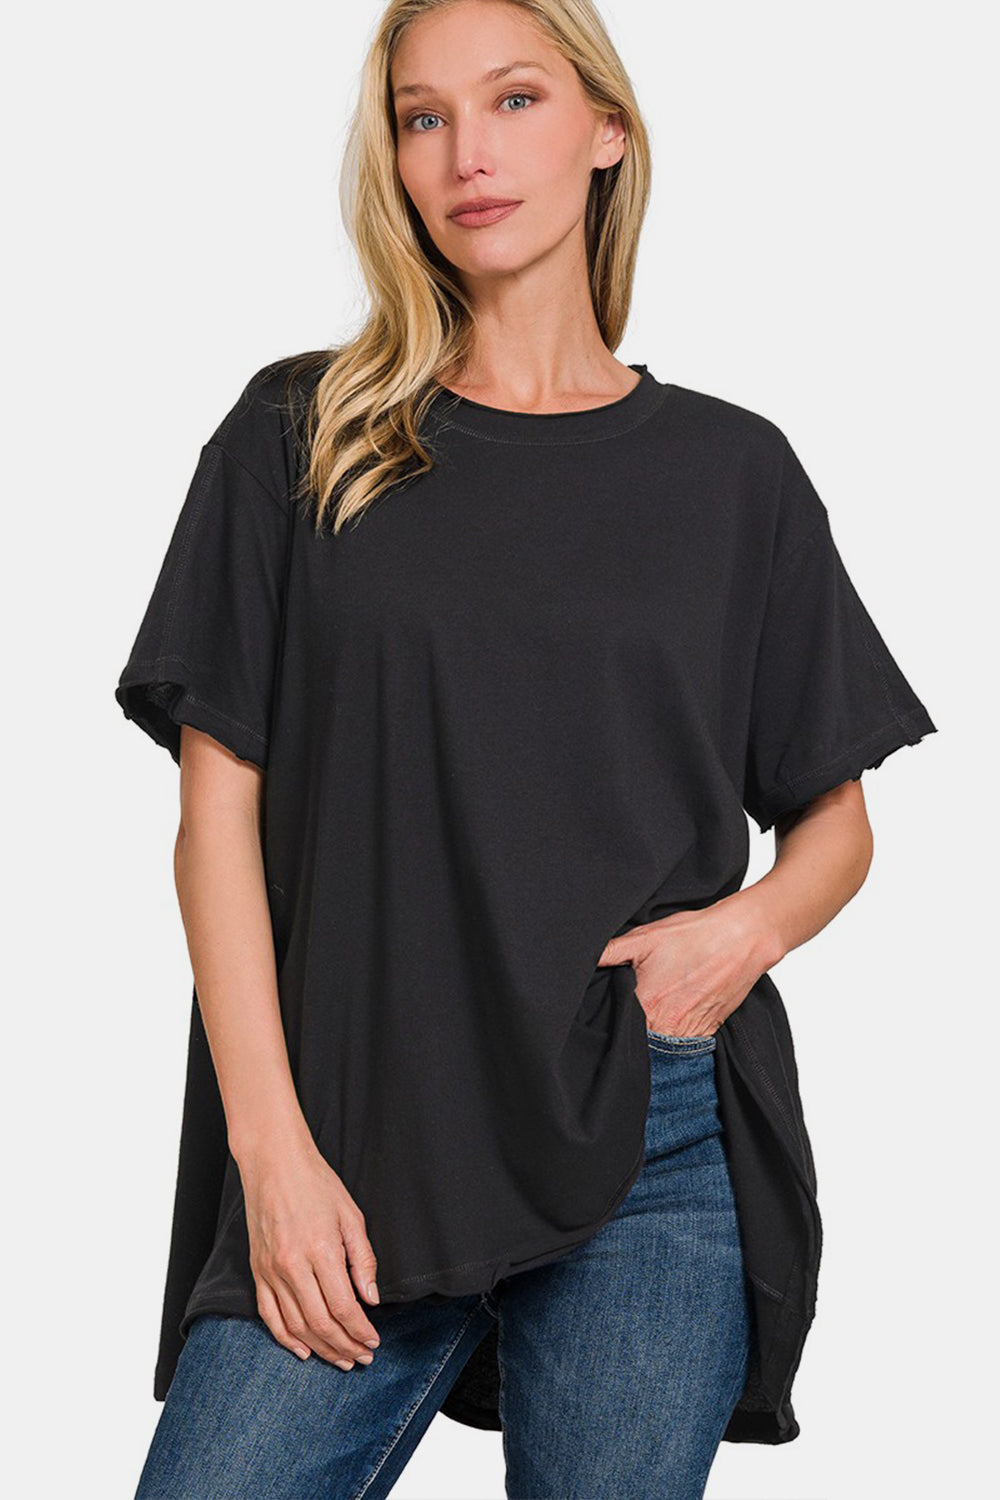 Zenana Round Neck Short Sleeve T-Shirt-100 Short Sleeve Tops-Inspired by Justeen-Women's Clothing Boutique in Chicago, Illinois